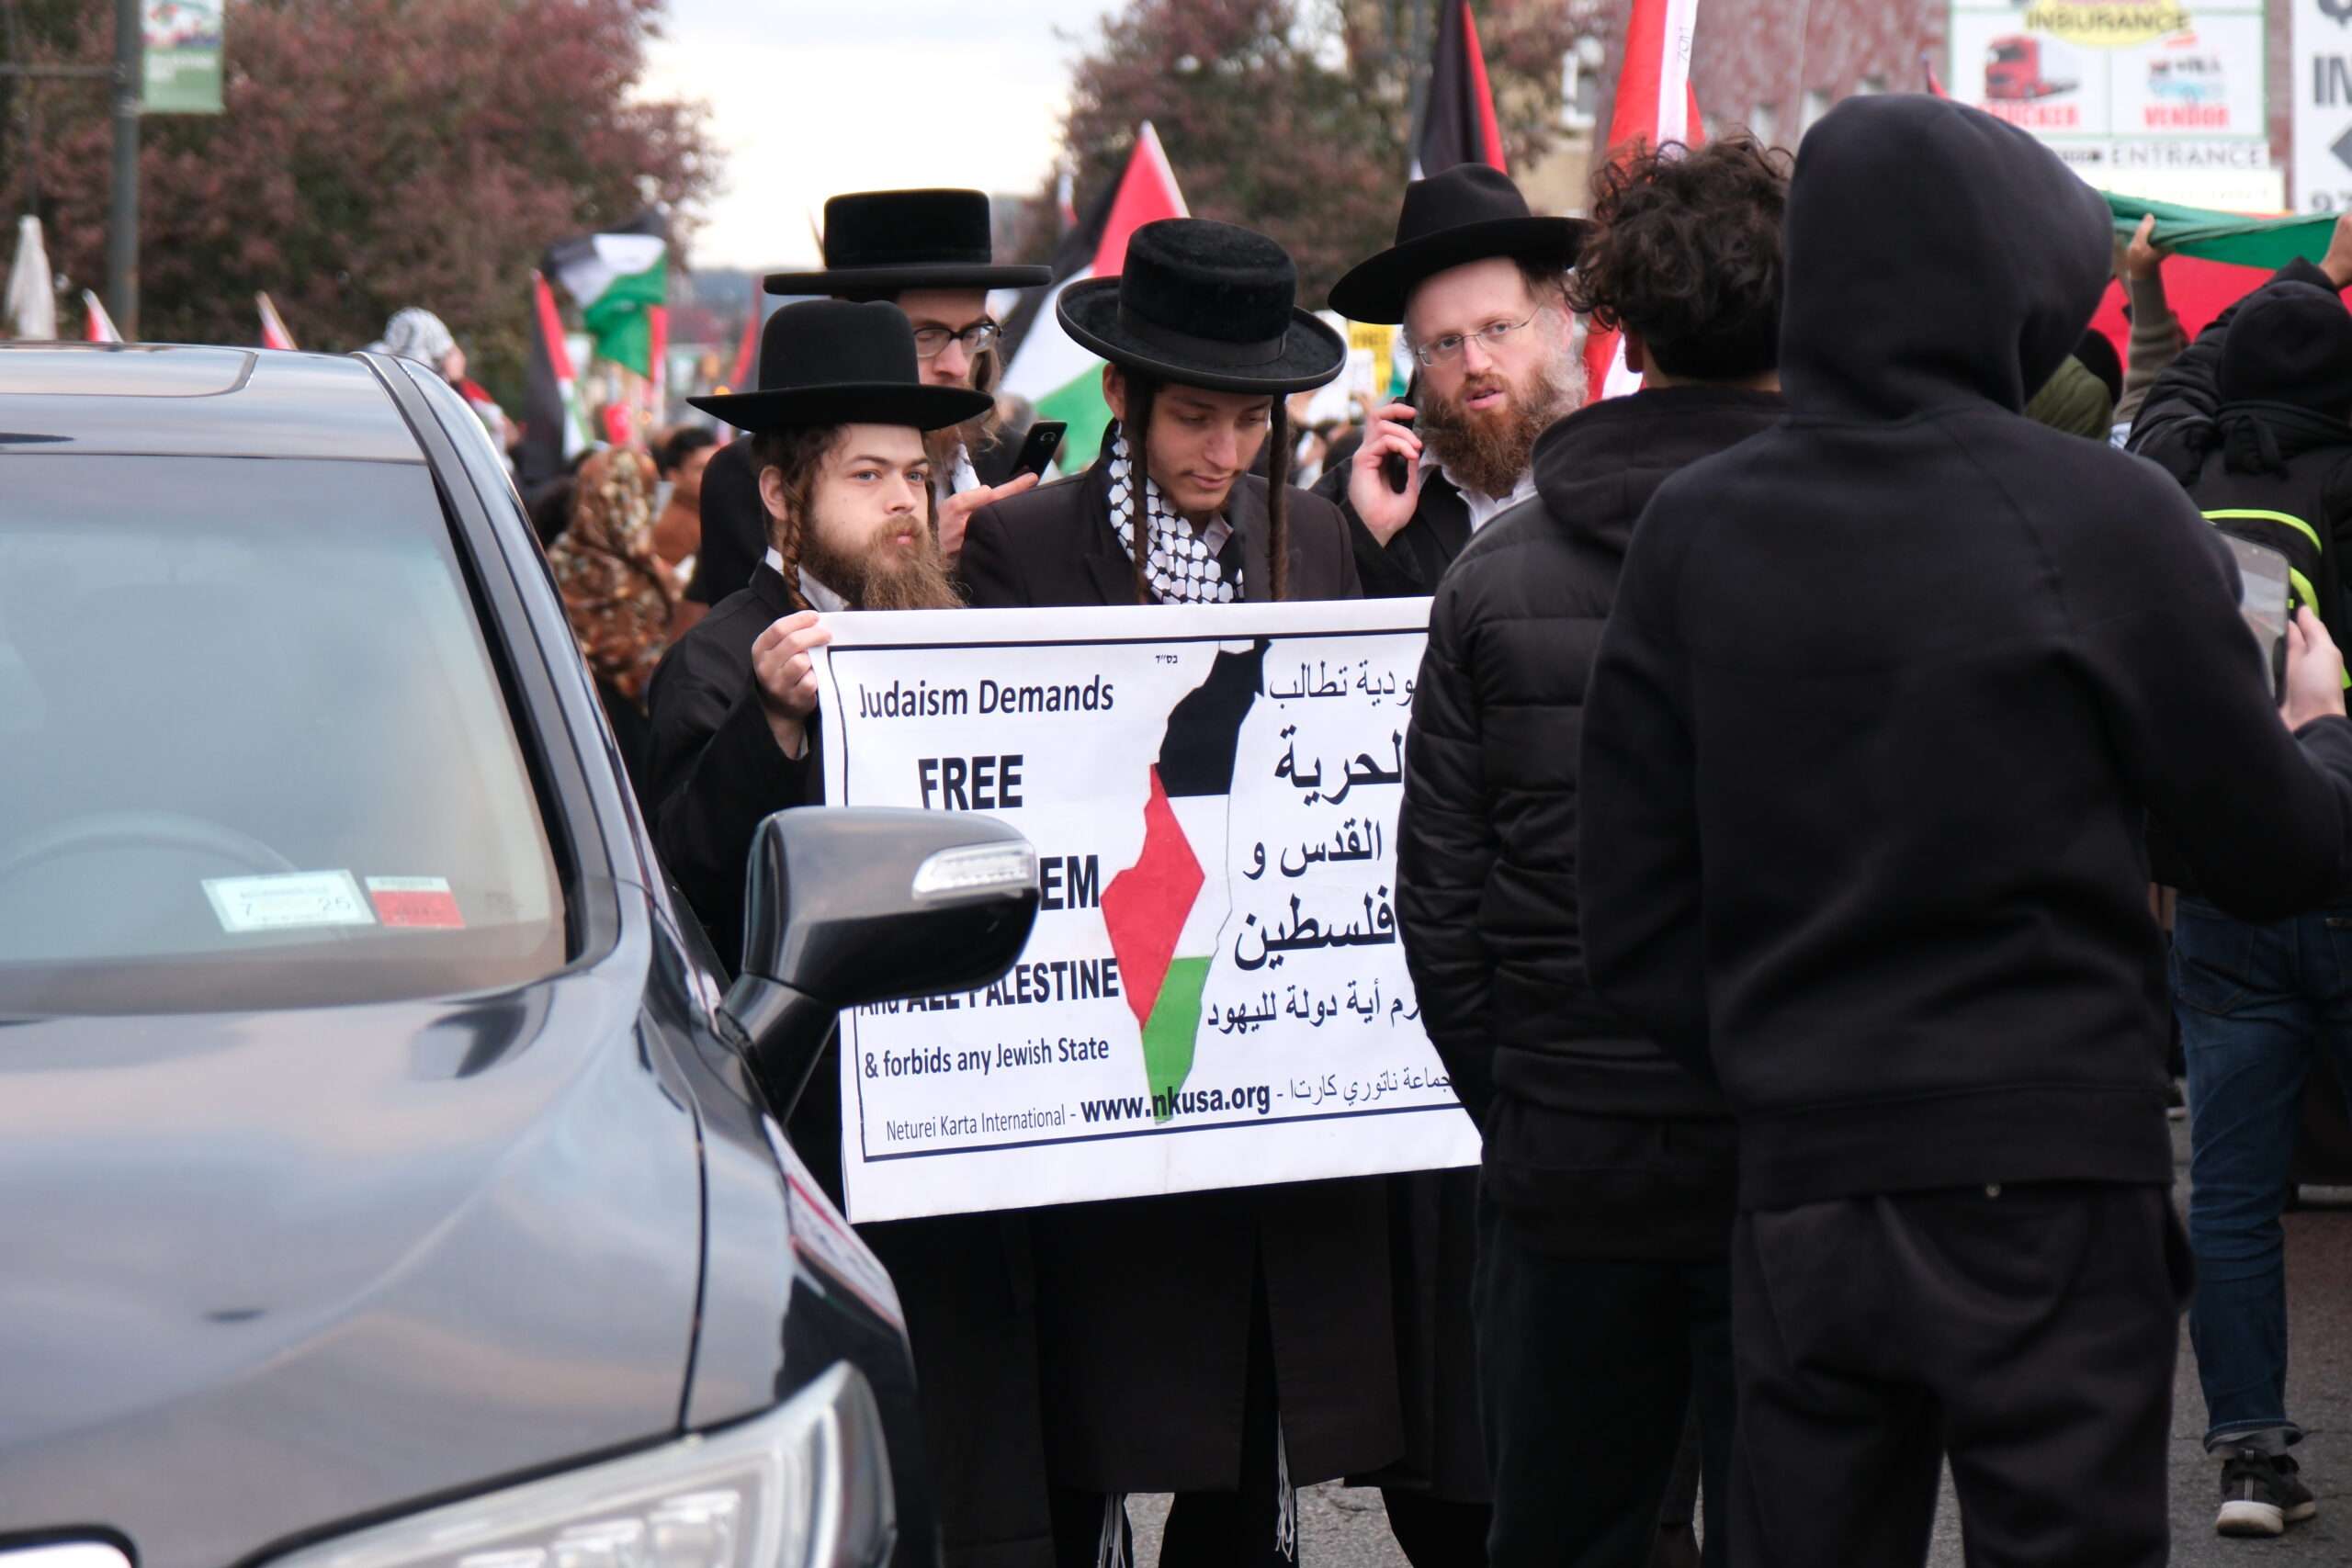 Members of the fundamentalist Jewish group known as Neturei Karta marched at the front of the protest.